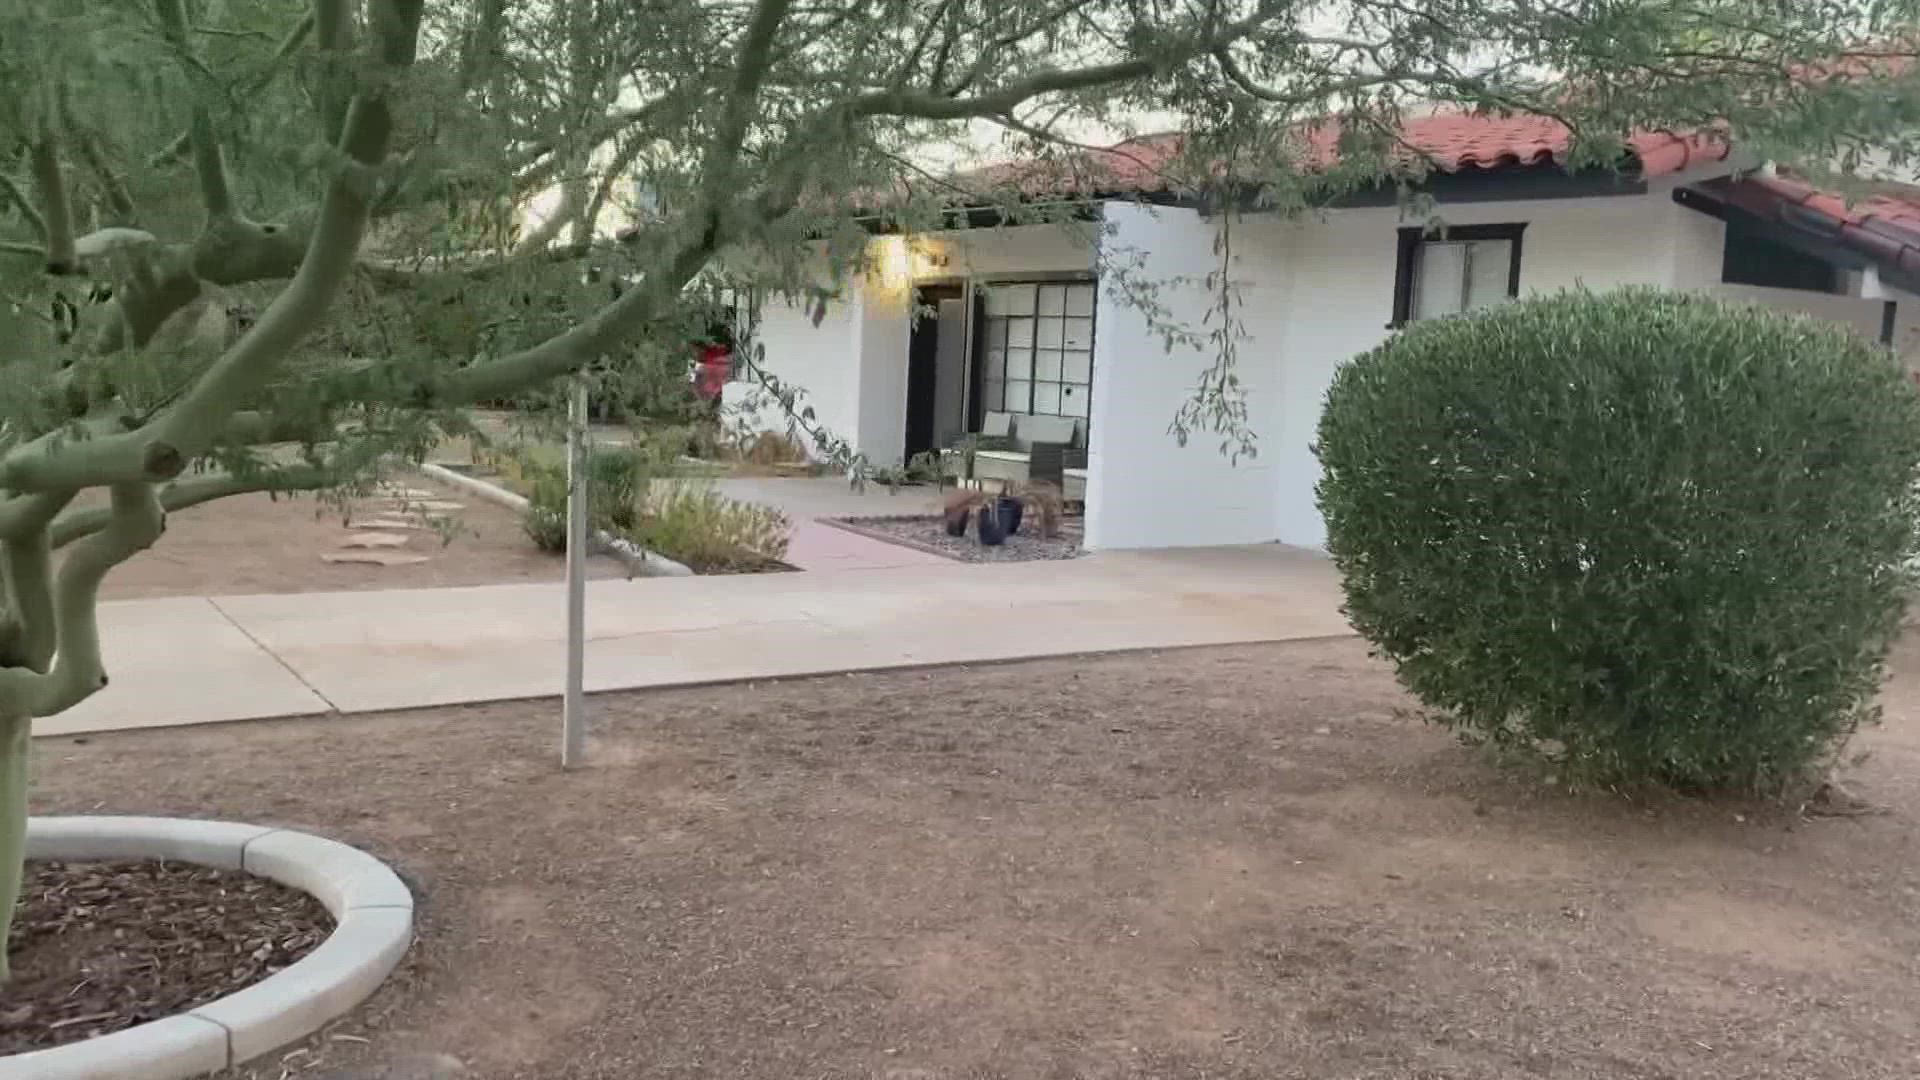 Witnesses and nearby residents talk about the moment multiple rounds of gunfire were shot at a Tempe house party early Saturday morning.